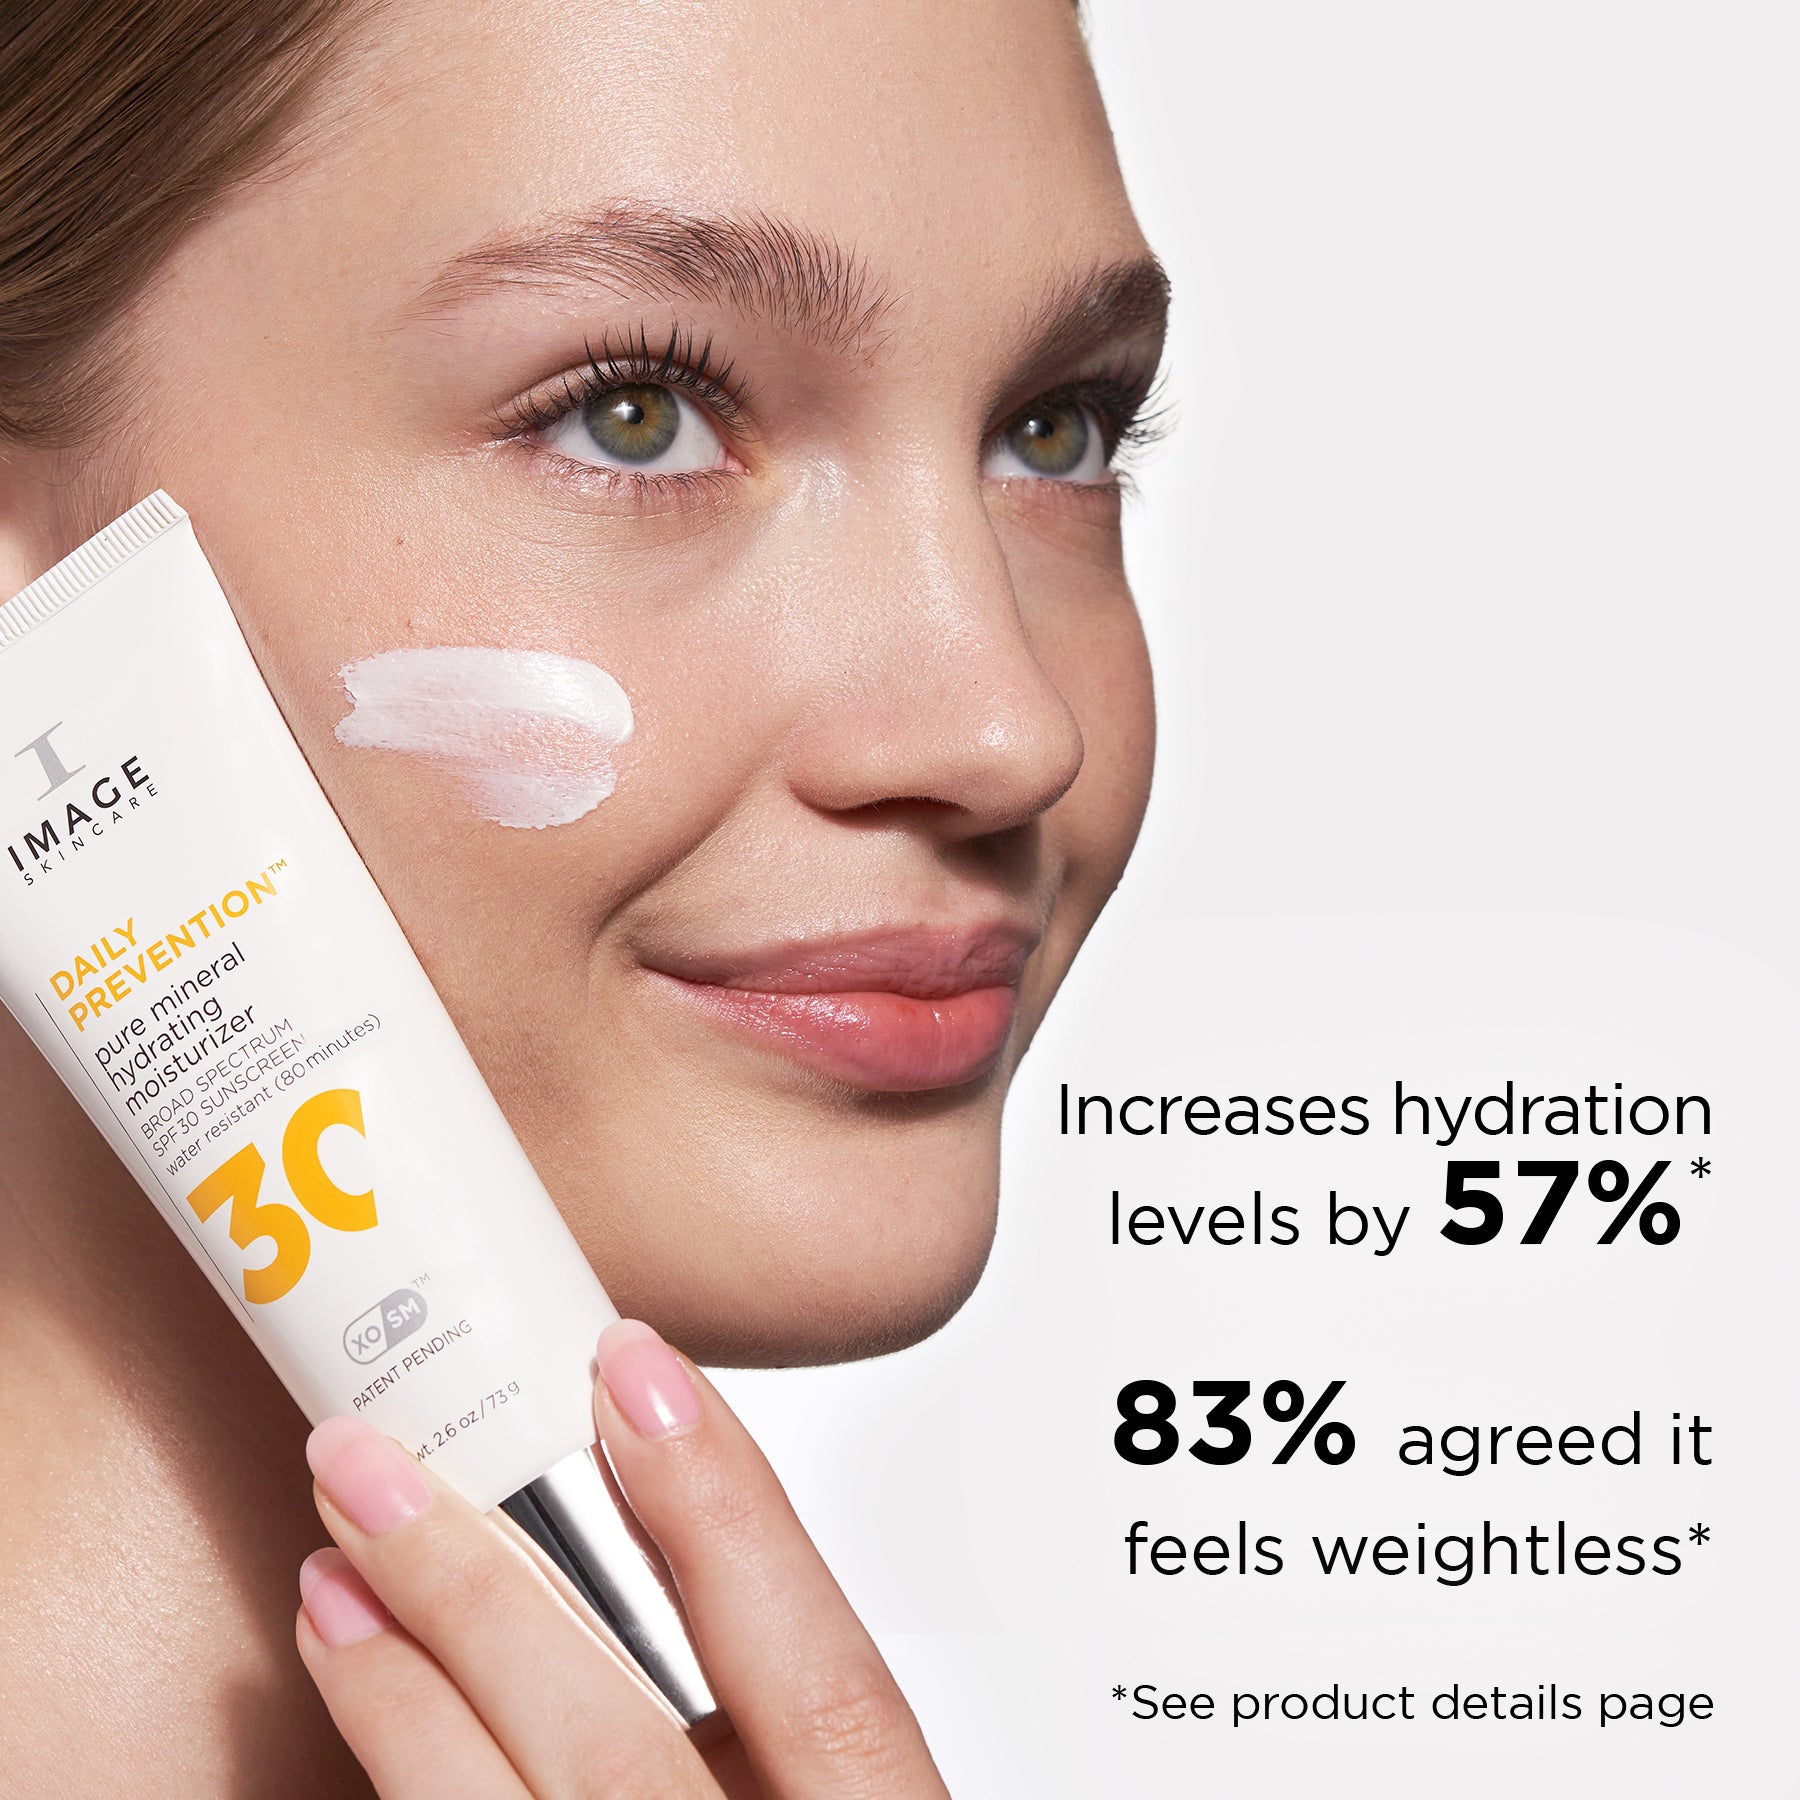 Woman holding a tube of DAILY PREVENTION pure mineral hydrating face moisturizer with sunscreen near her face. Graphic shows product benefits: increases hydration levels by 57%, and 83% of users agreed it feels weightless.